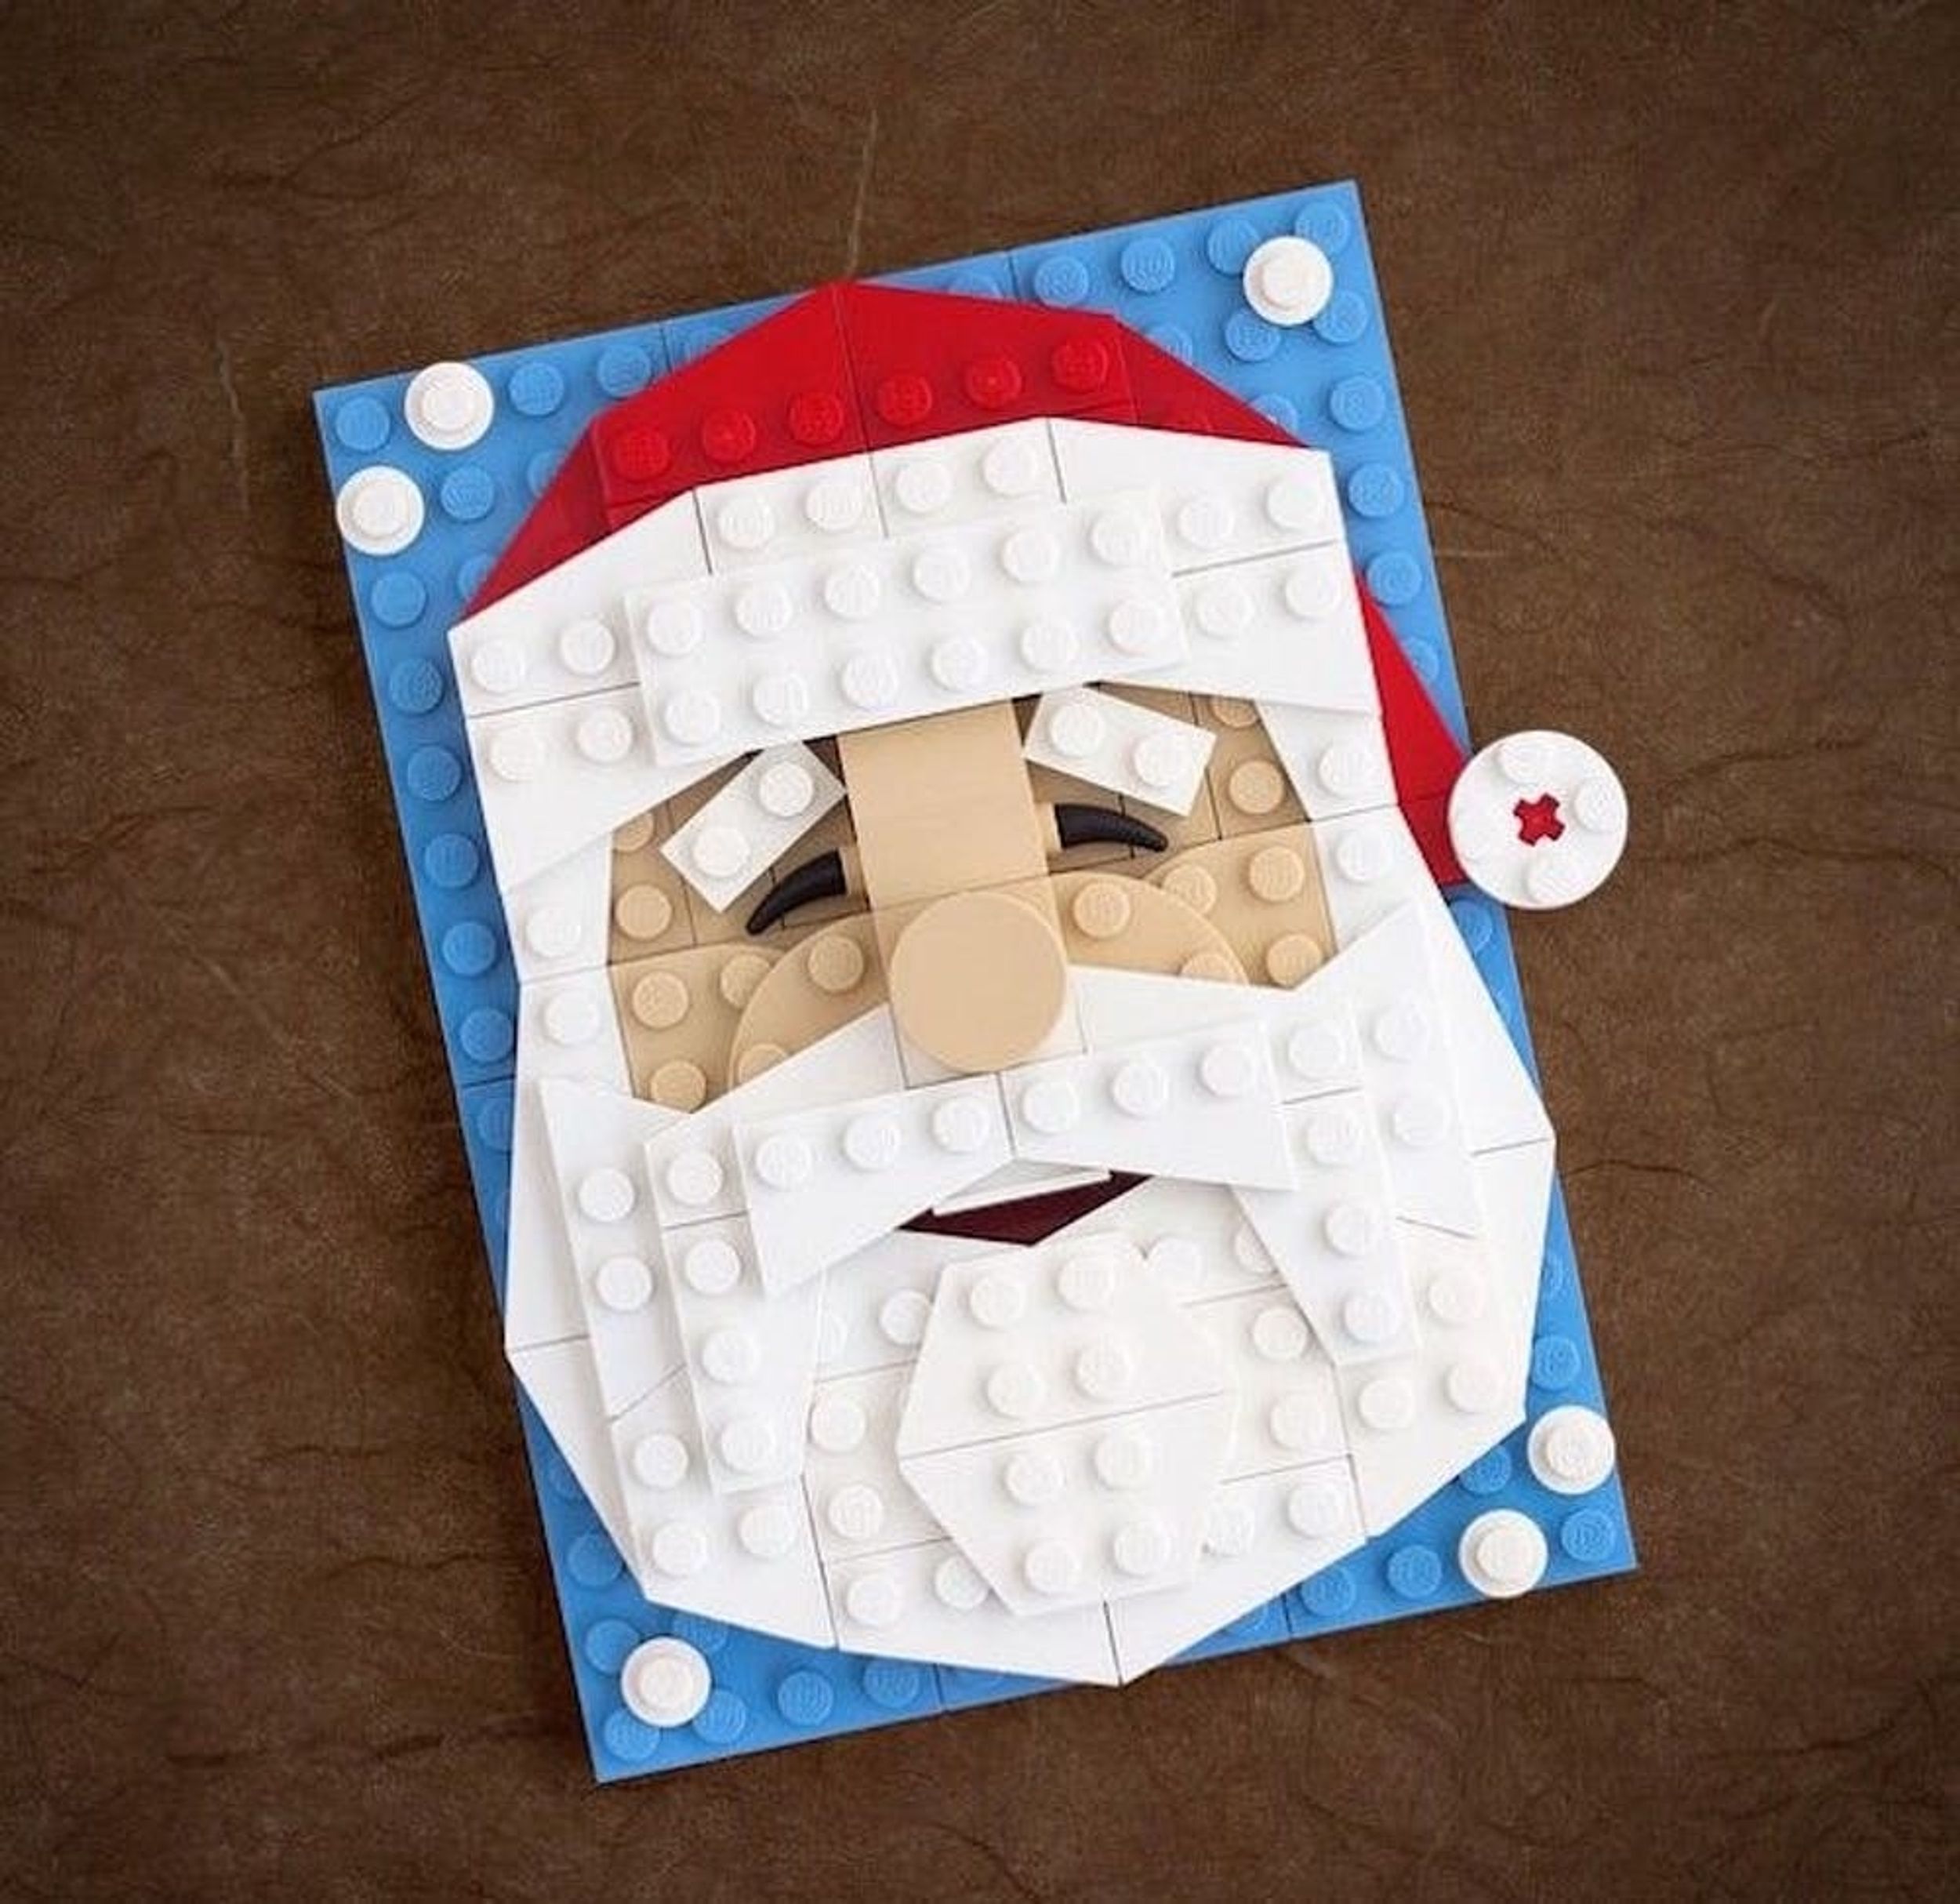 14 Festive Holiday LEGO DIYs for Kids (and Adults!)